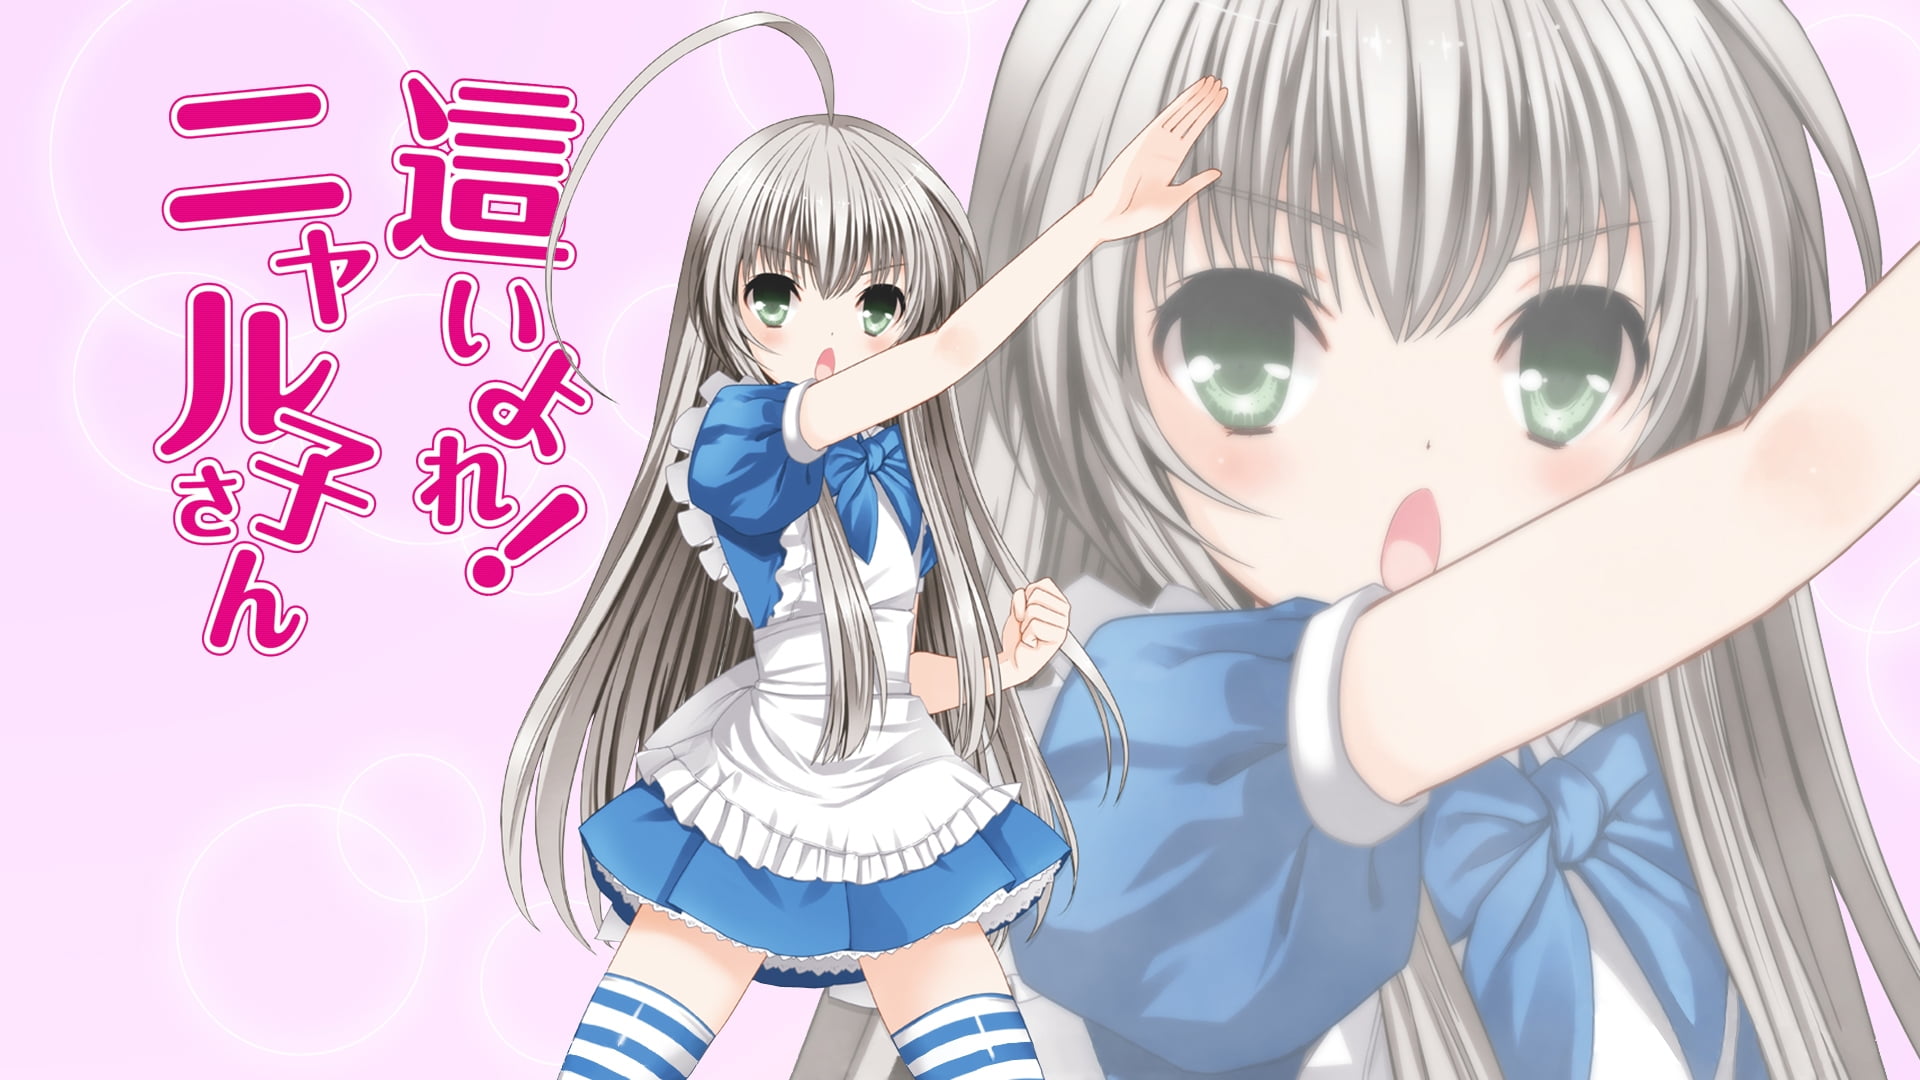 gray-haired female anime character with blue and white maid suit